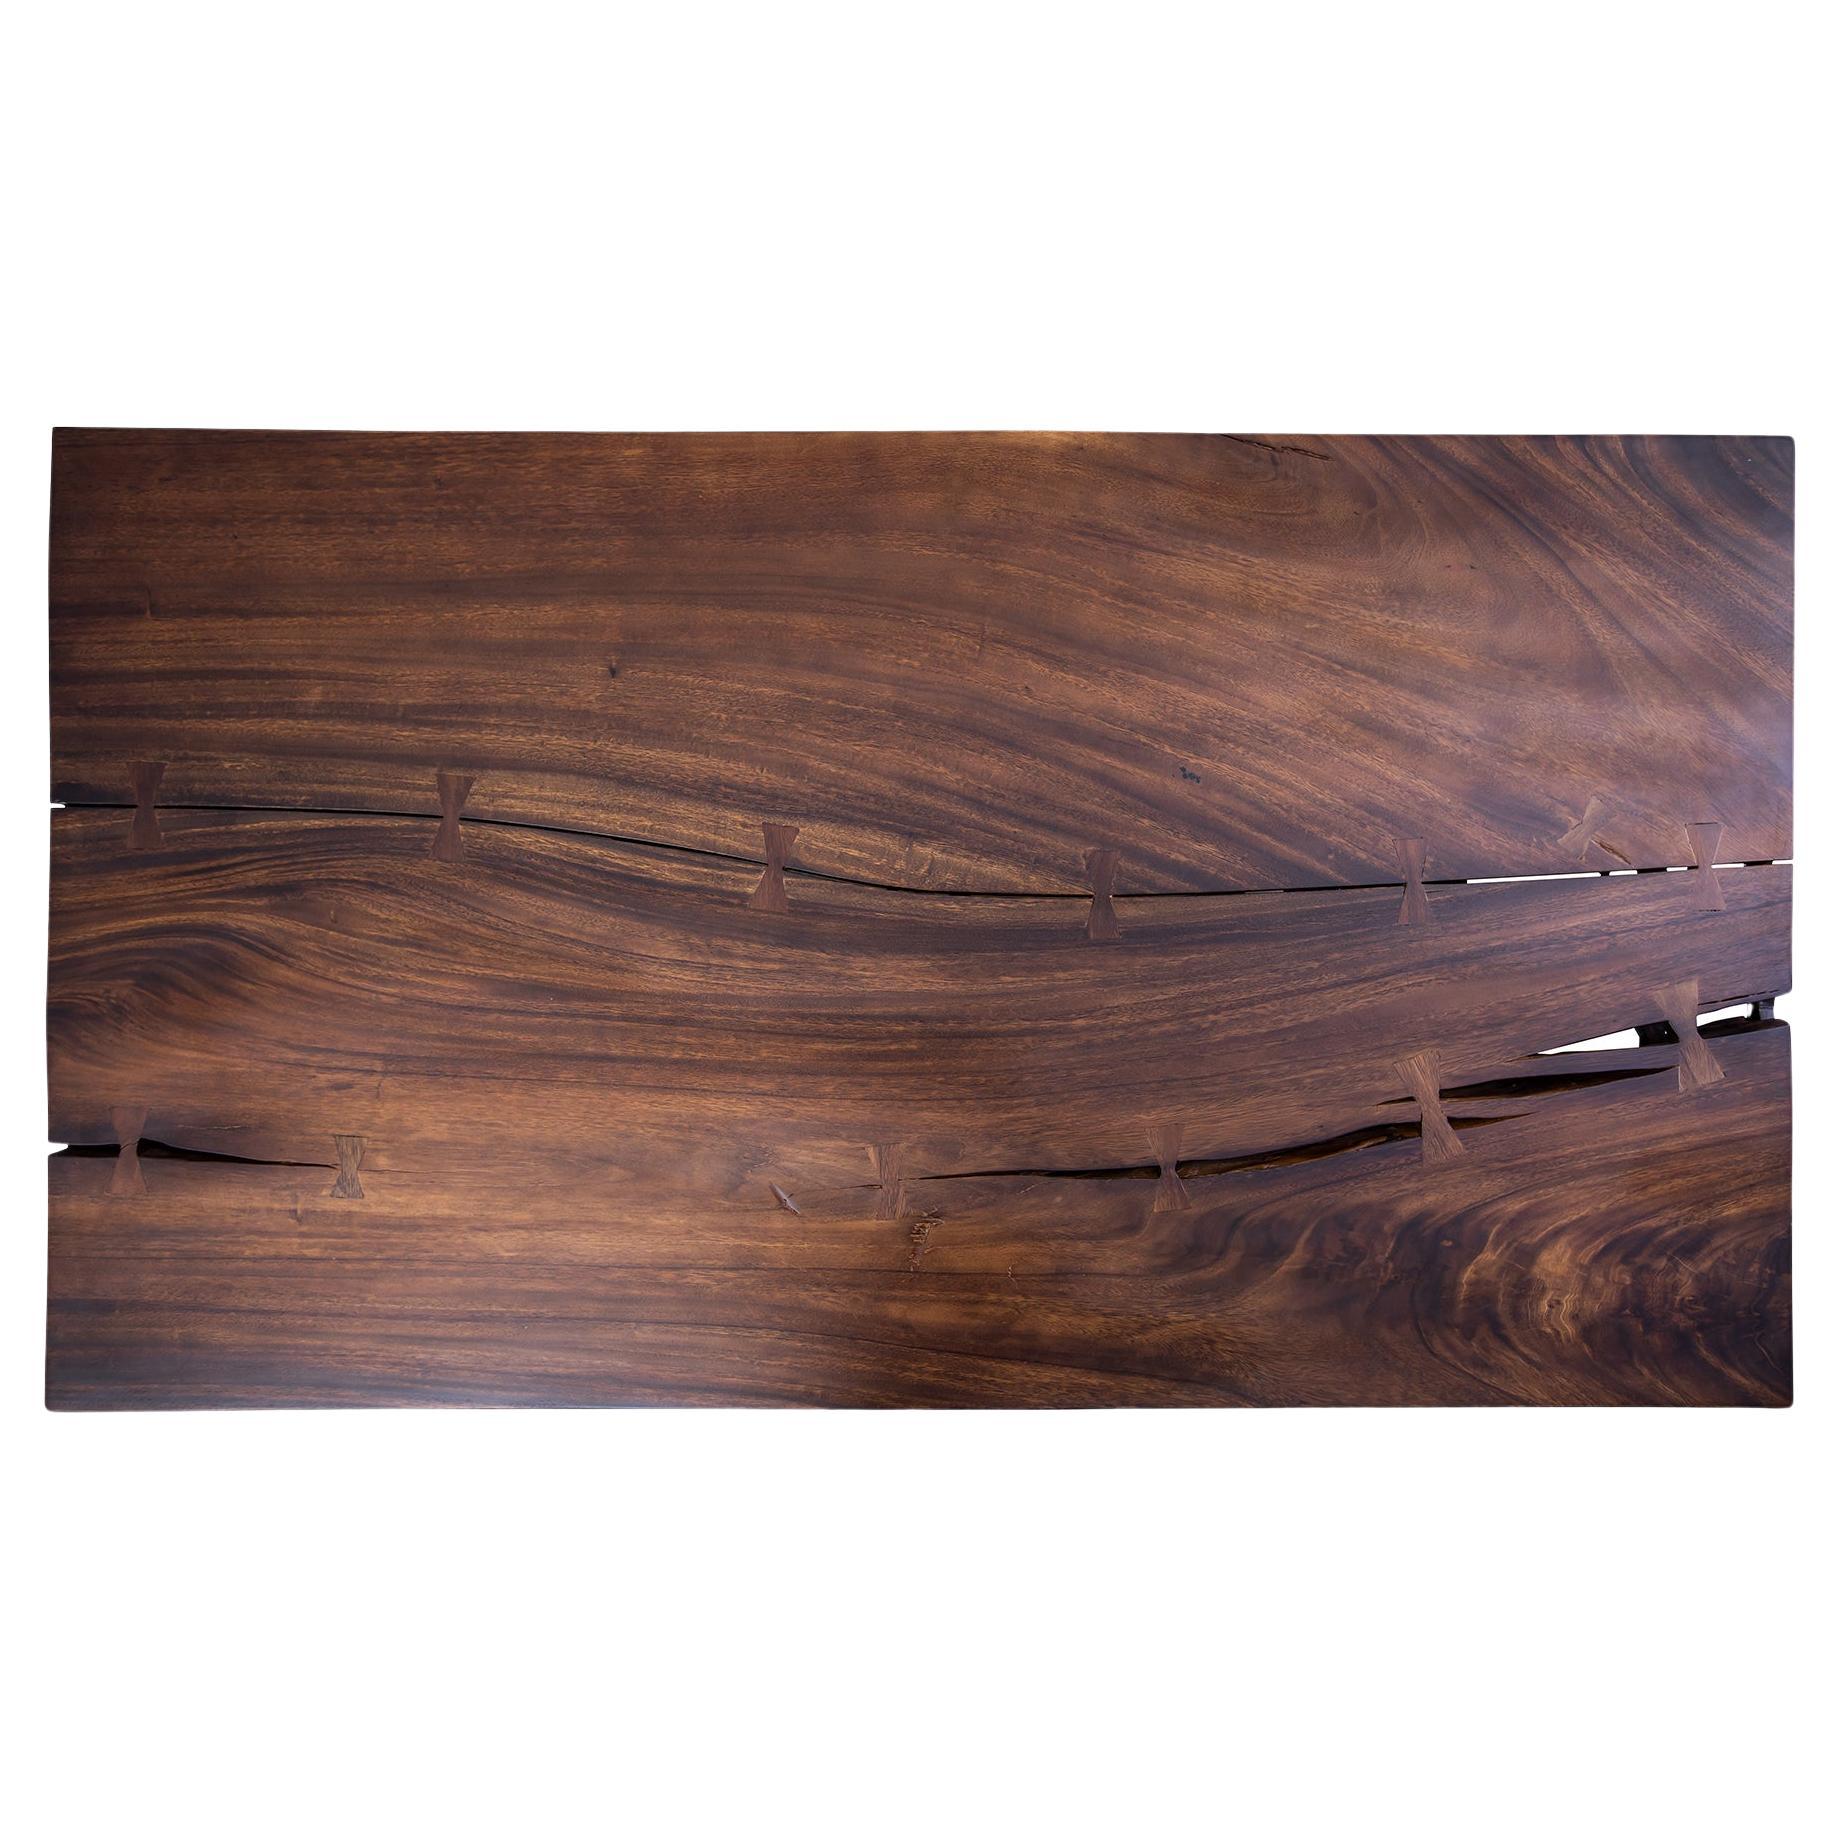 Acacia Live Edge Limited Edition Slab Table/Desk in Smooth Milk Chocolate For Sale